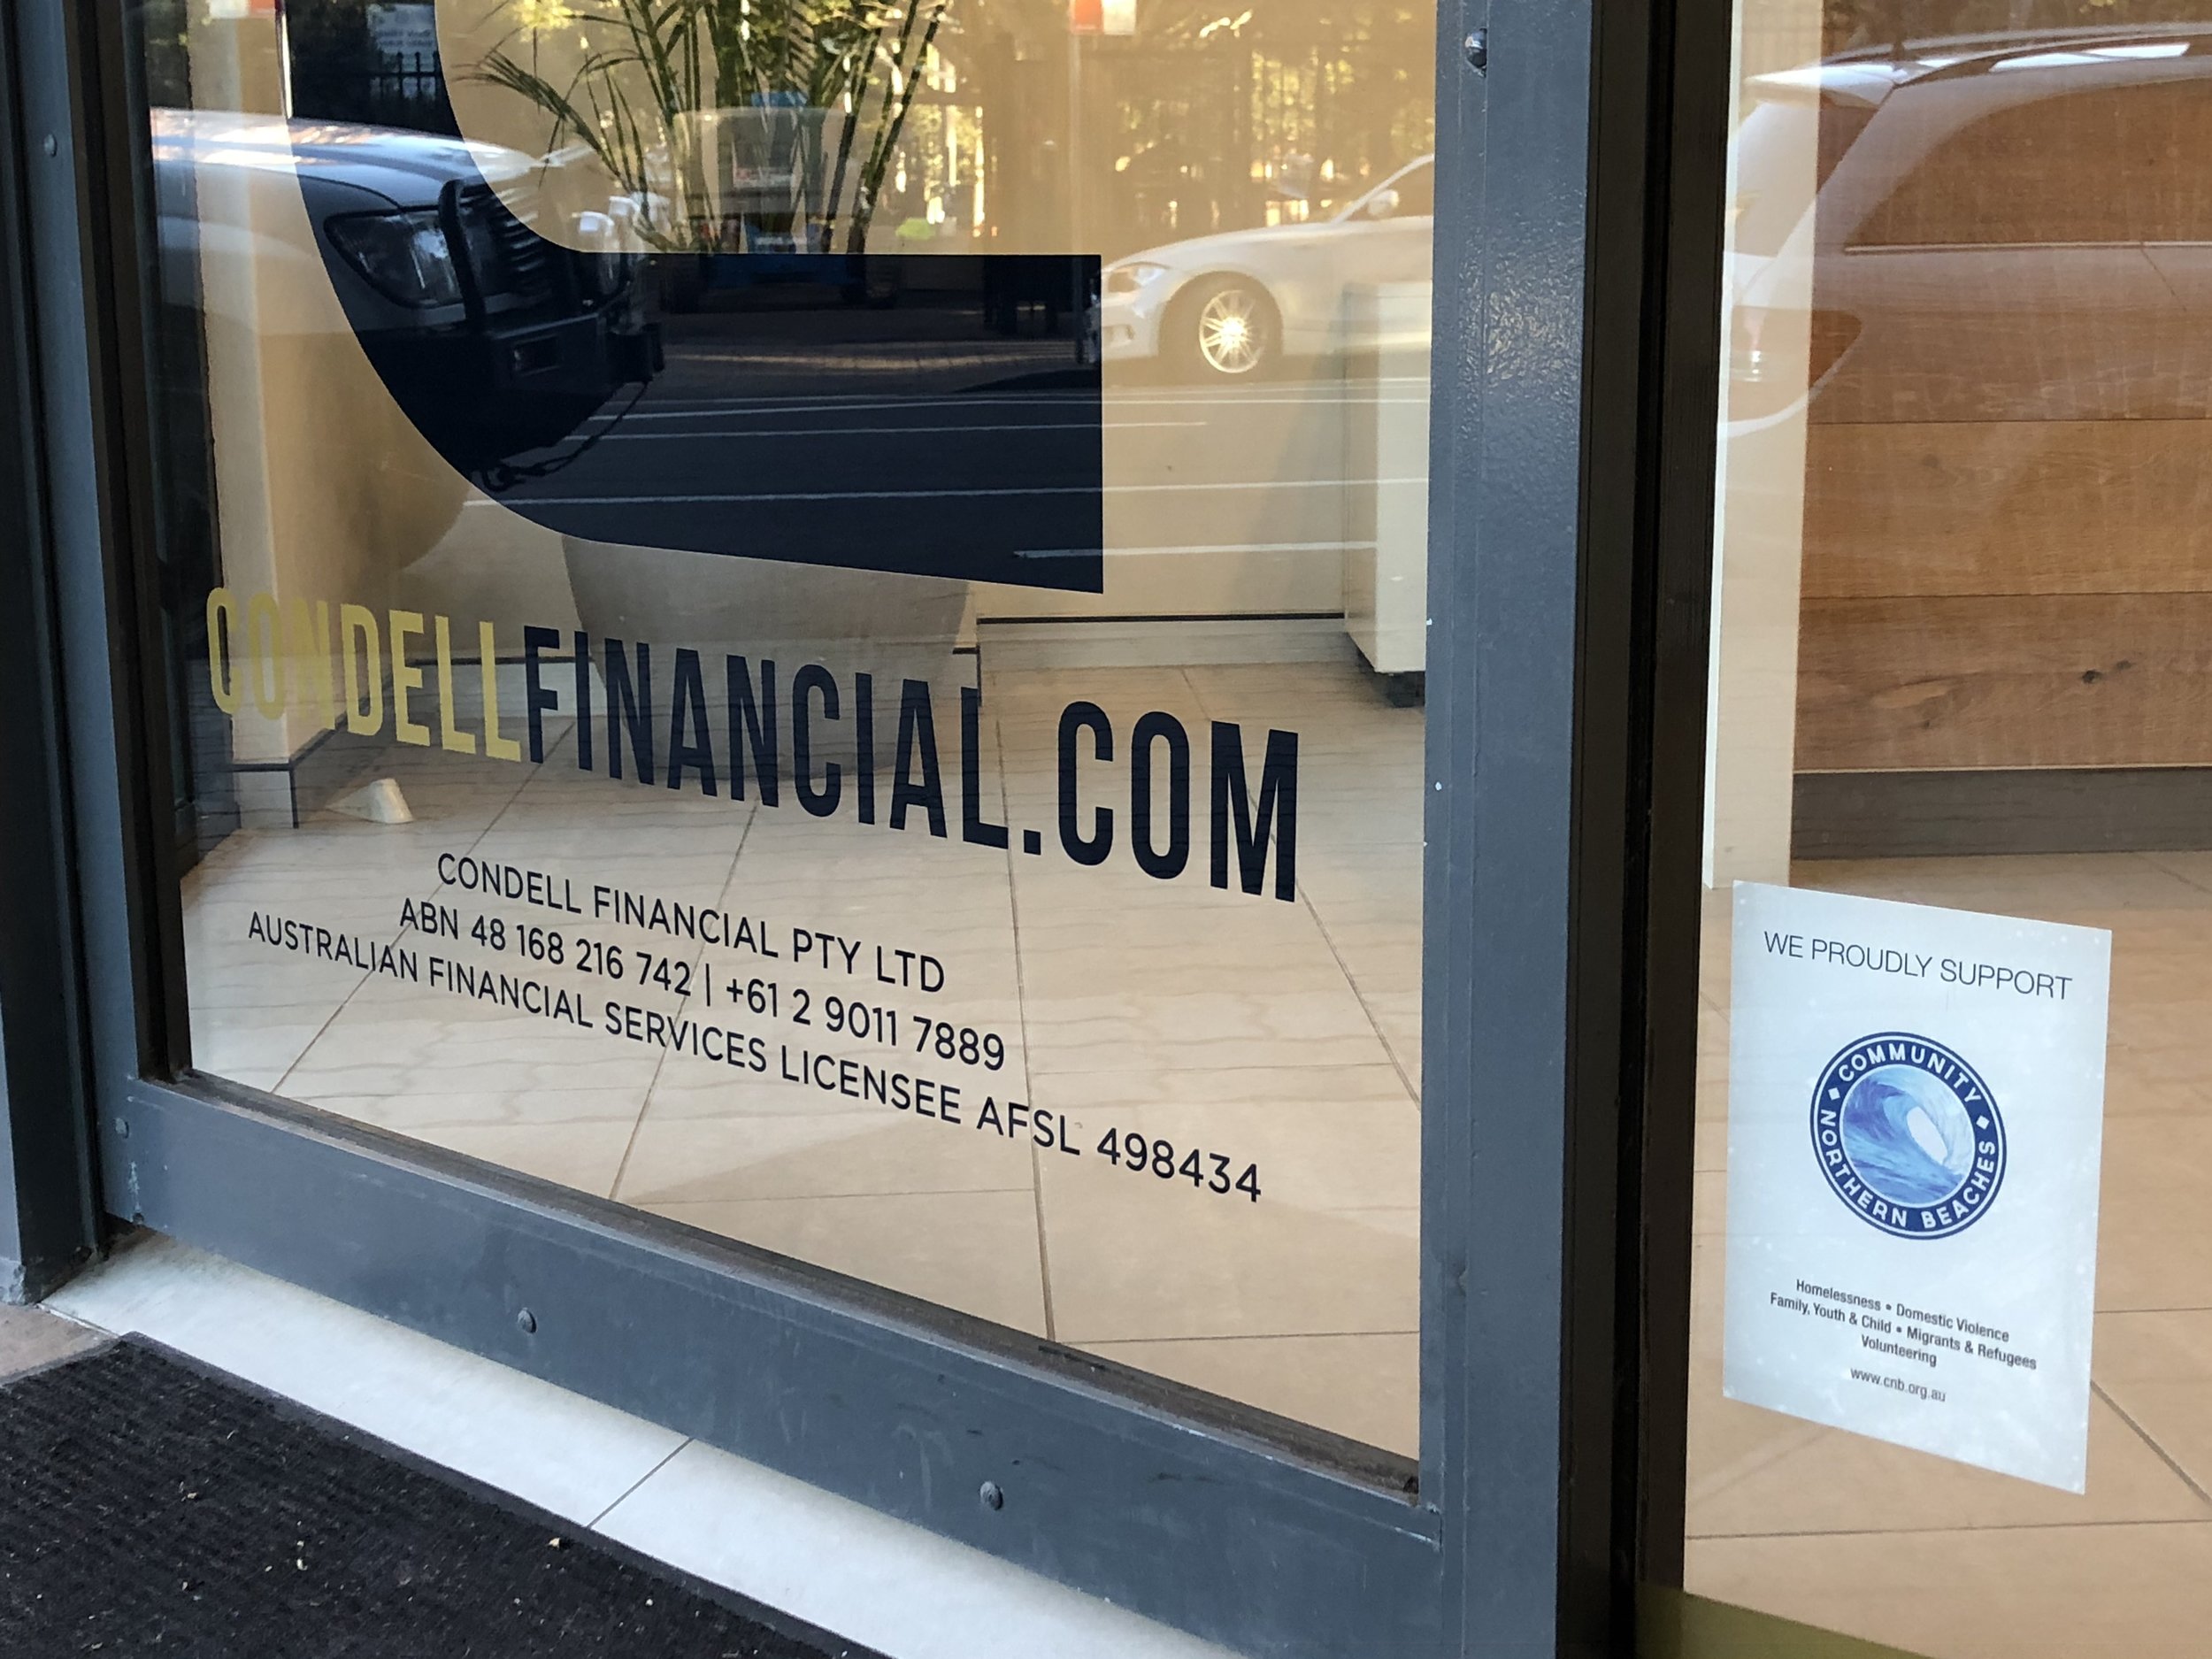 CONDELL FINANCIAL Thanks to Andrew at Condell Financial for finding a spot on their lovely shop front for our local business support window sticker. You are helping us spread the word about the services at Community Northern Beaches. www.condellfinaâ€¦